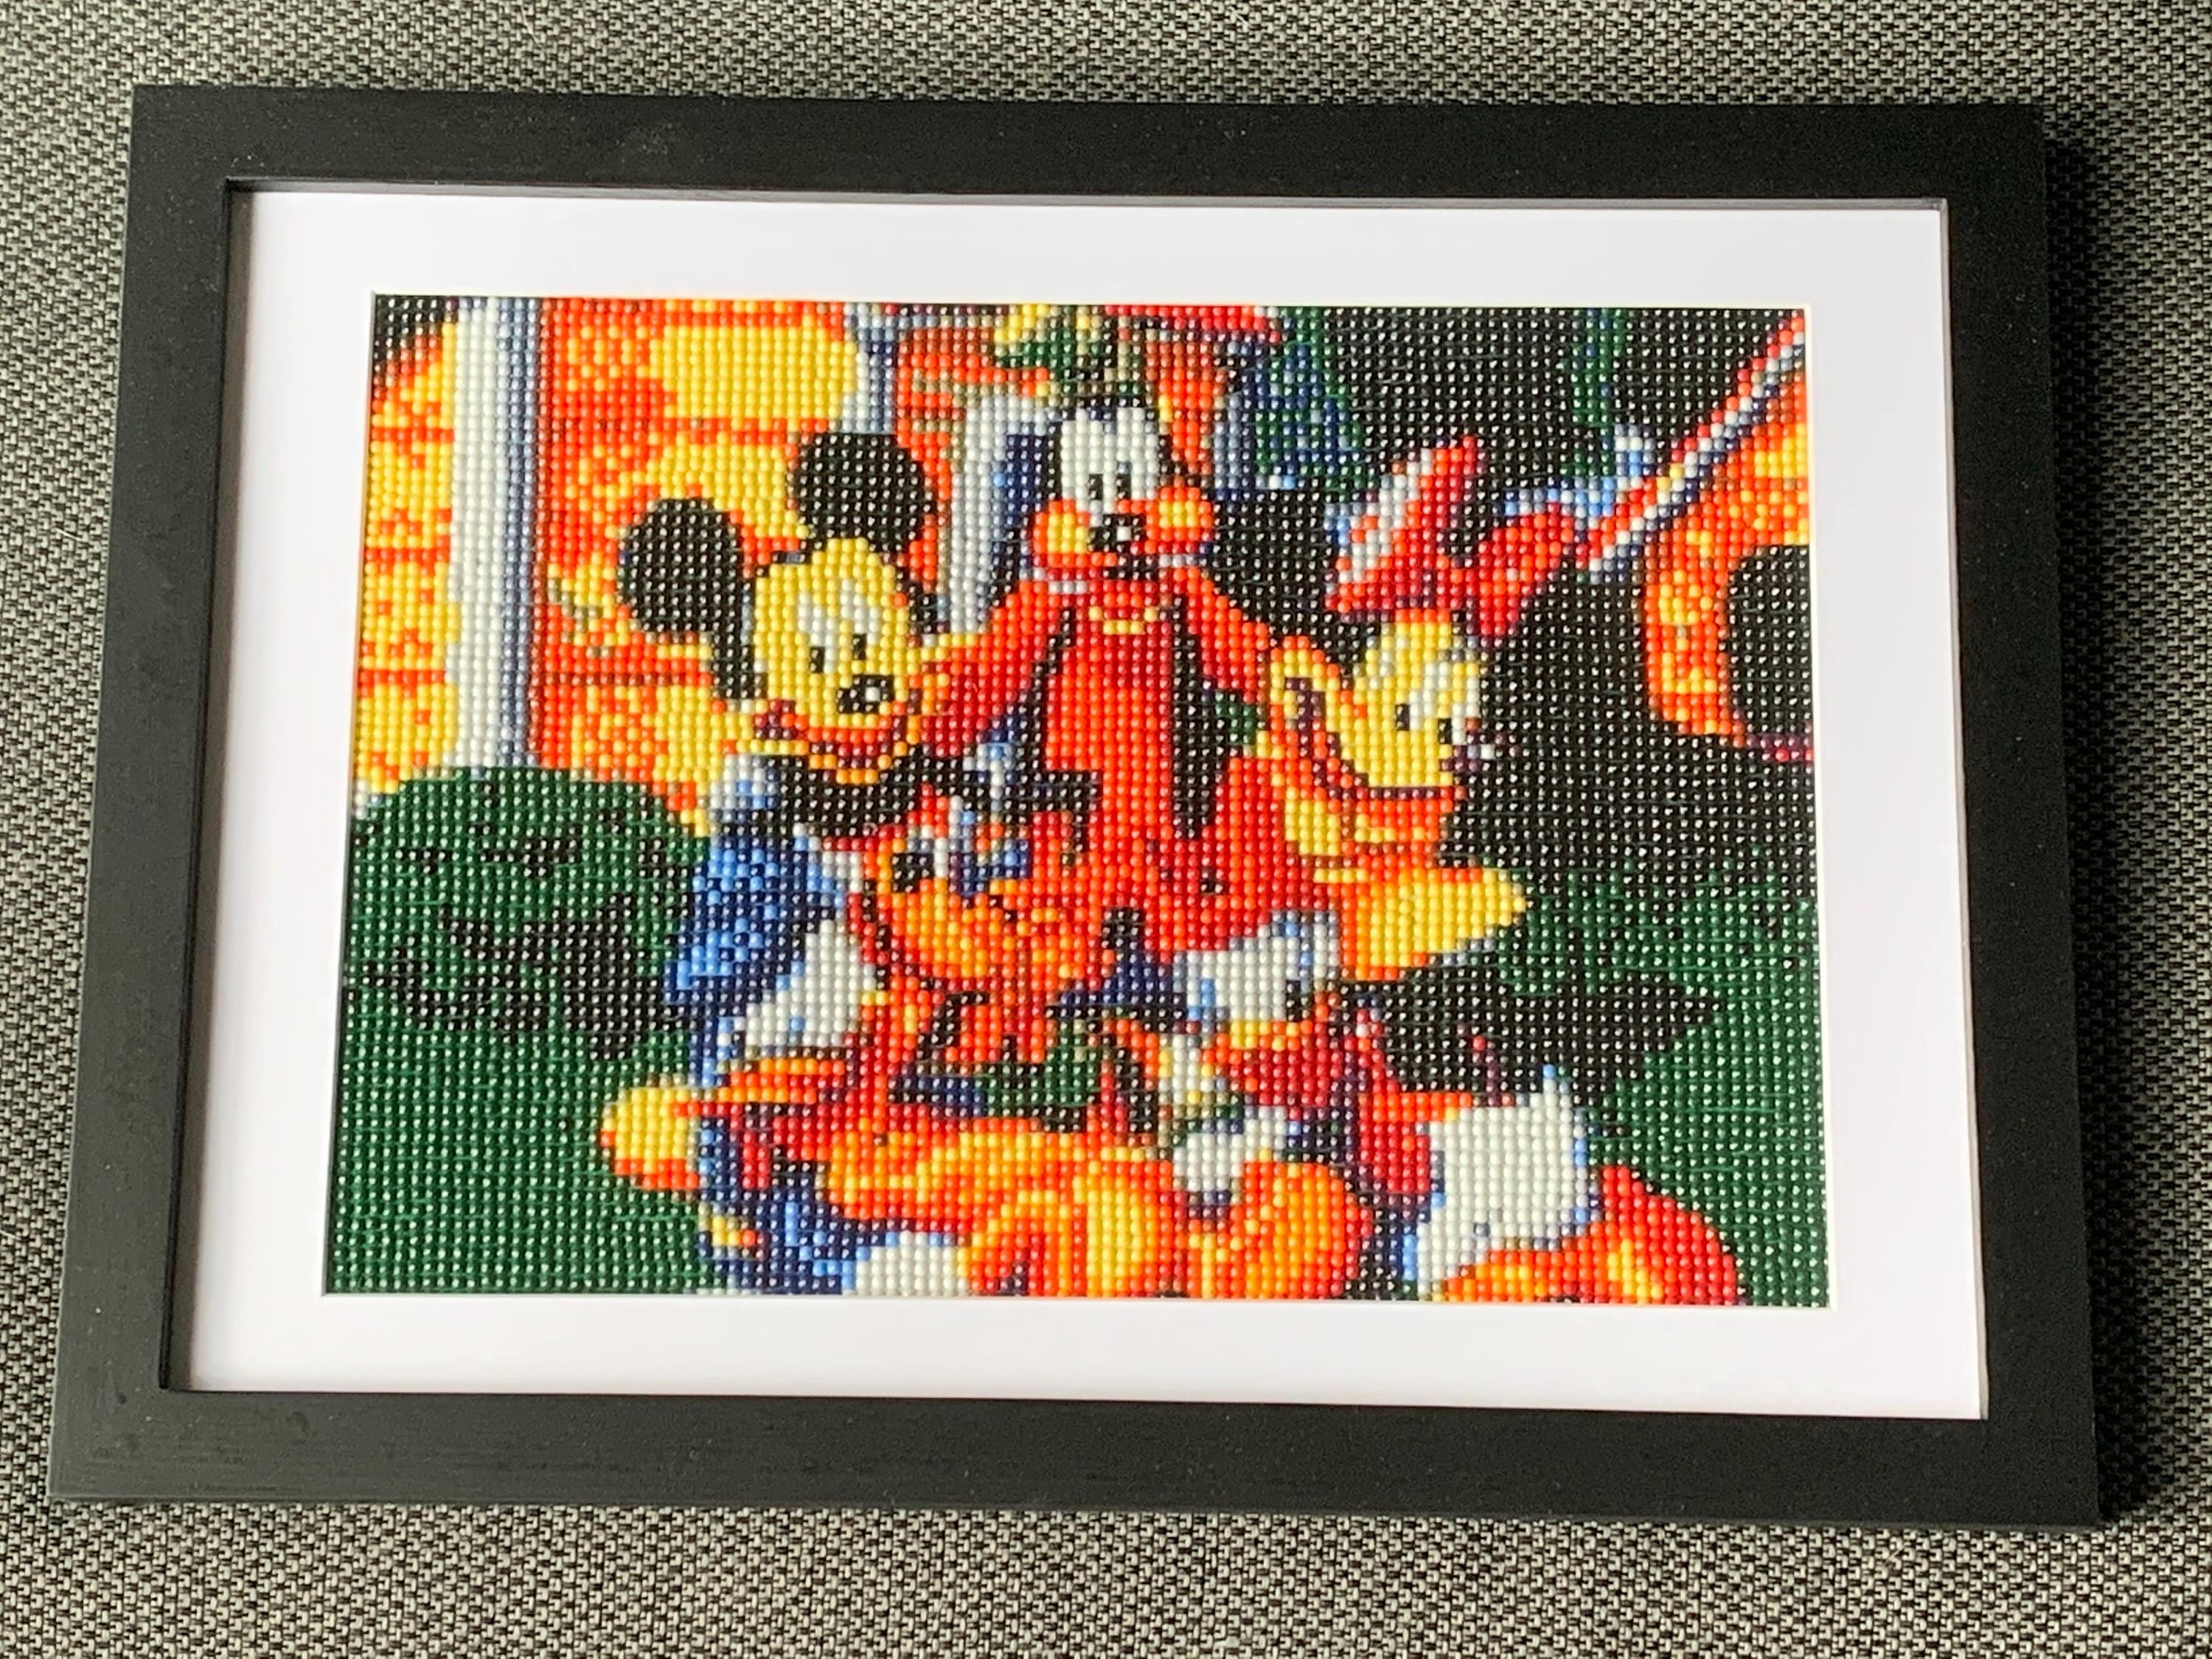 Completed, Unframed Mickey Mouse Diamond Art painting